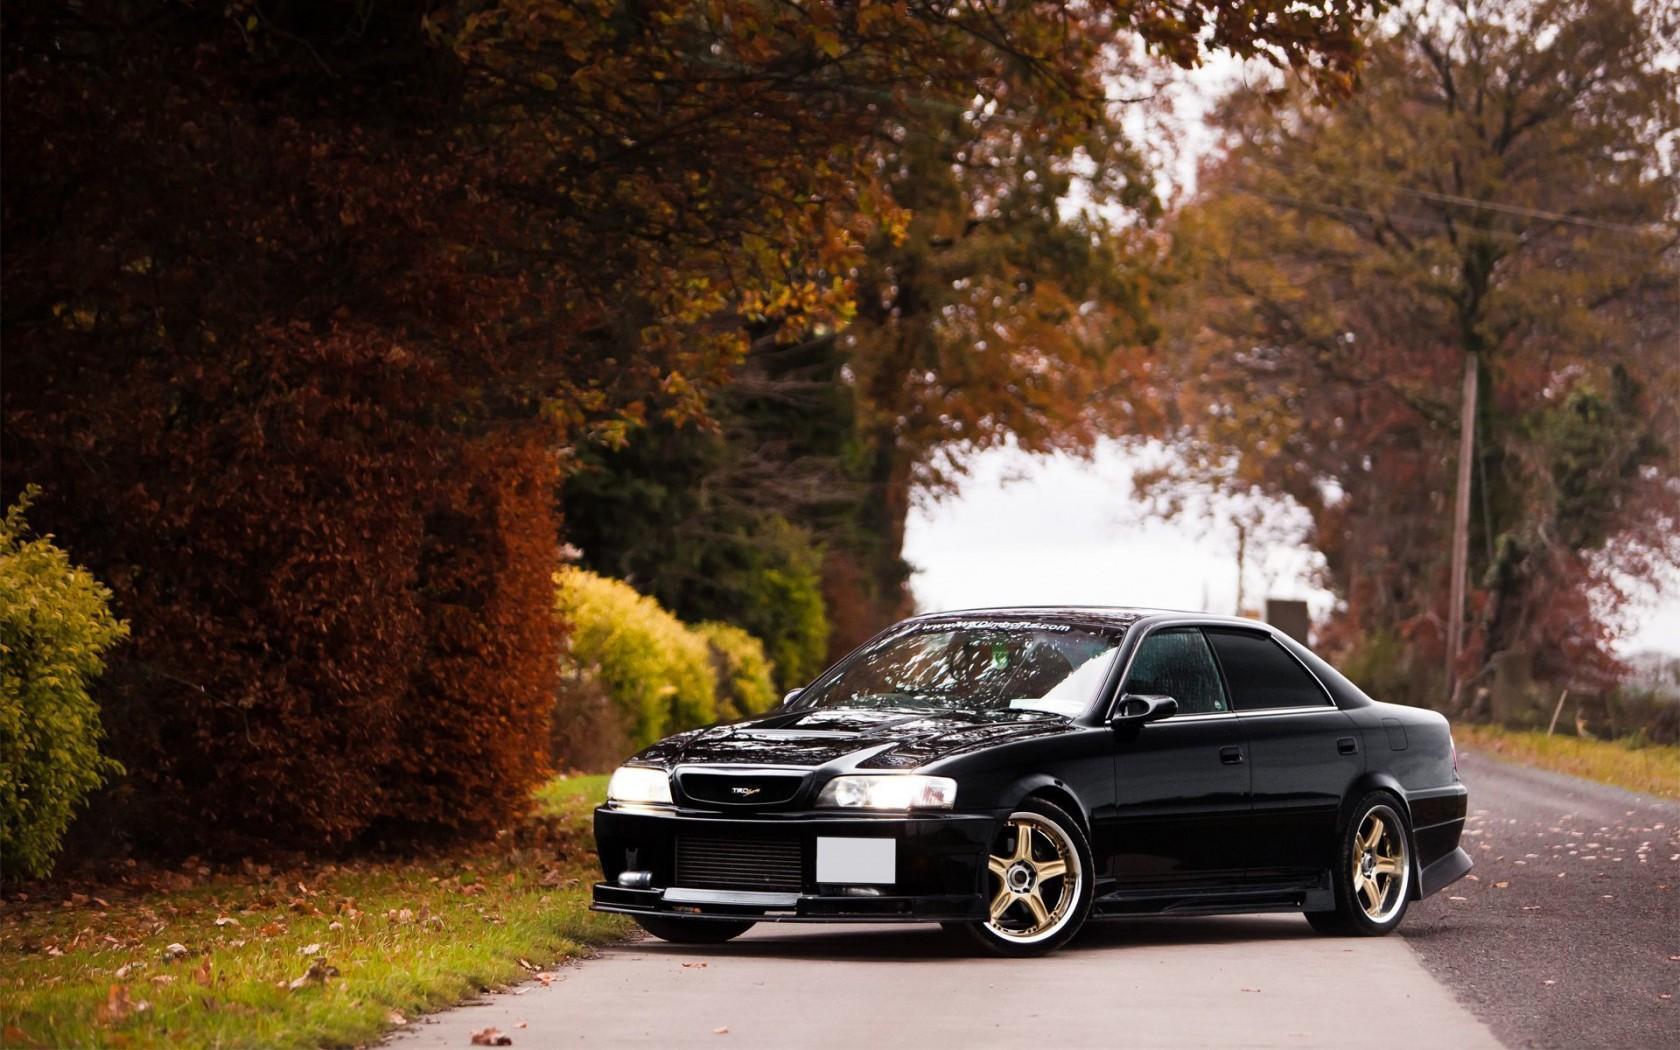 Toyota Chaser Wallpapers - Wallpaper Cave